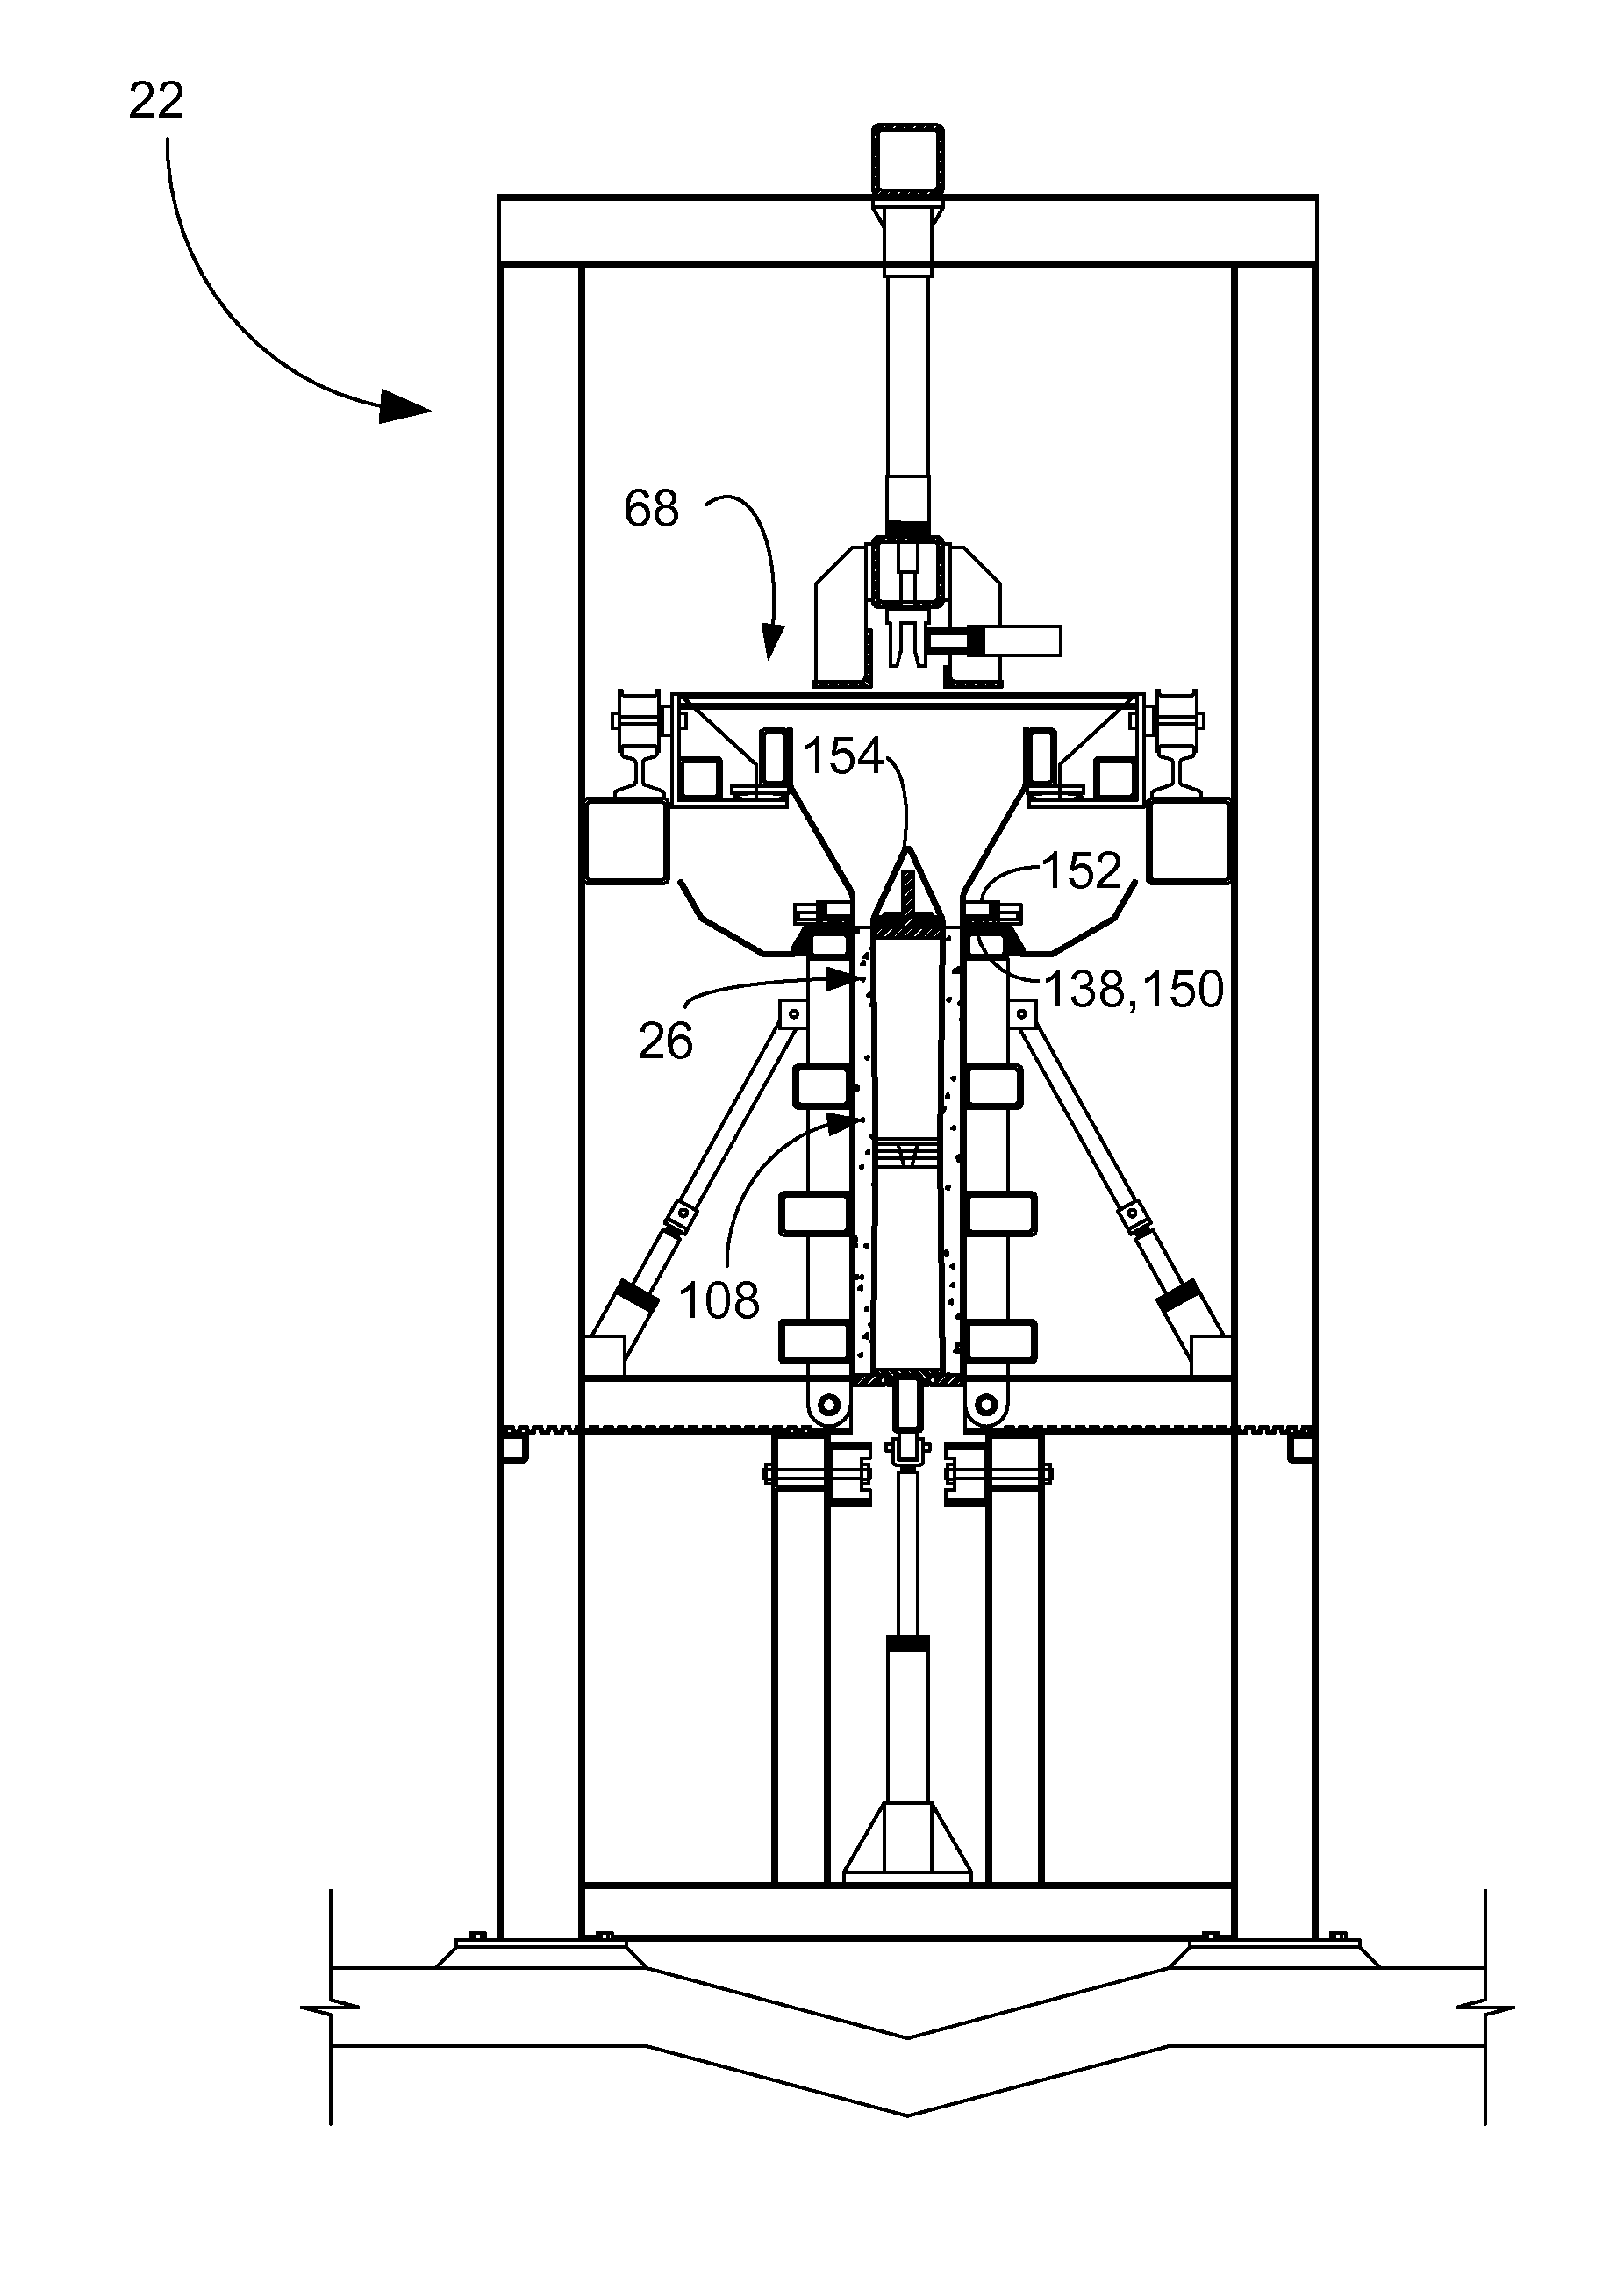 Automated concrete structural member fabrication system, apparatus and method